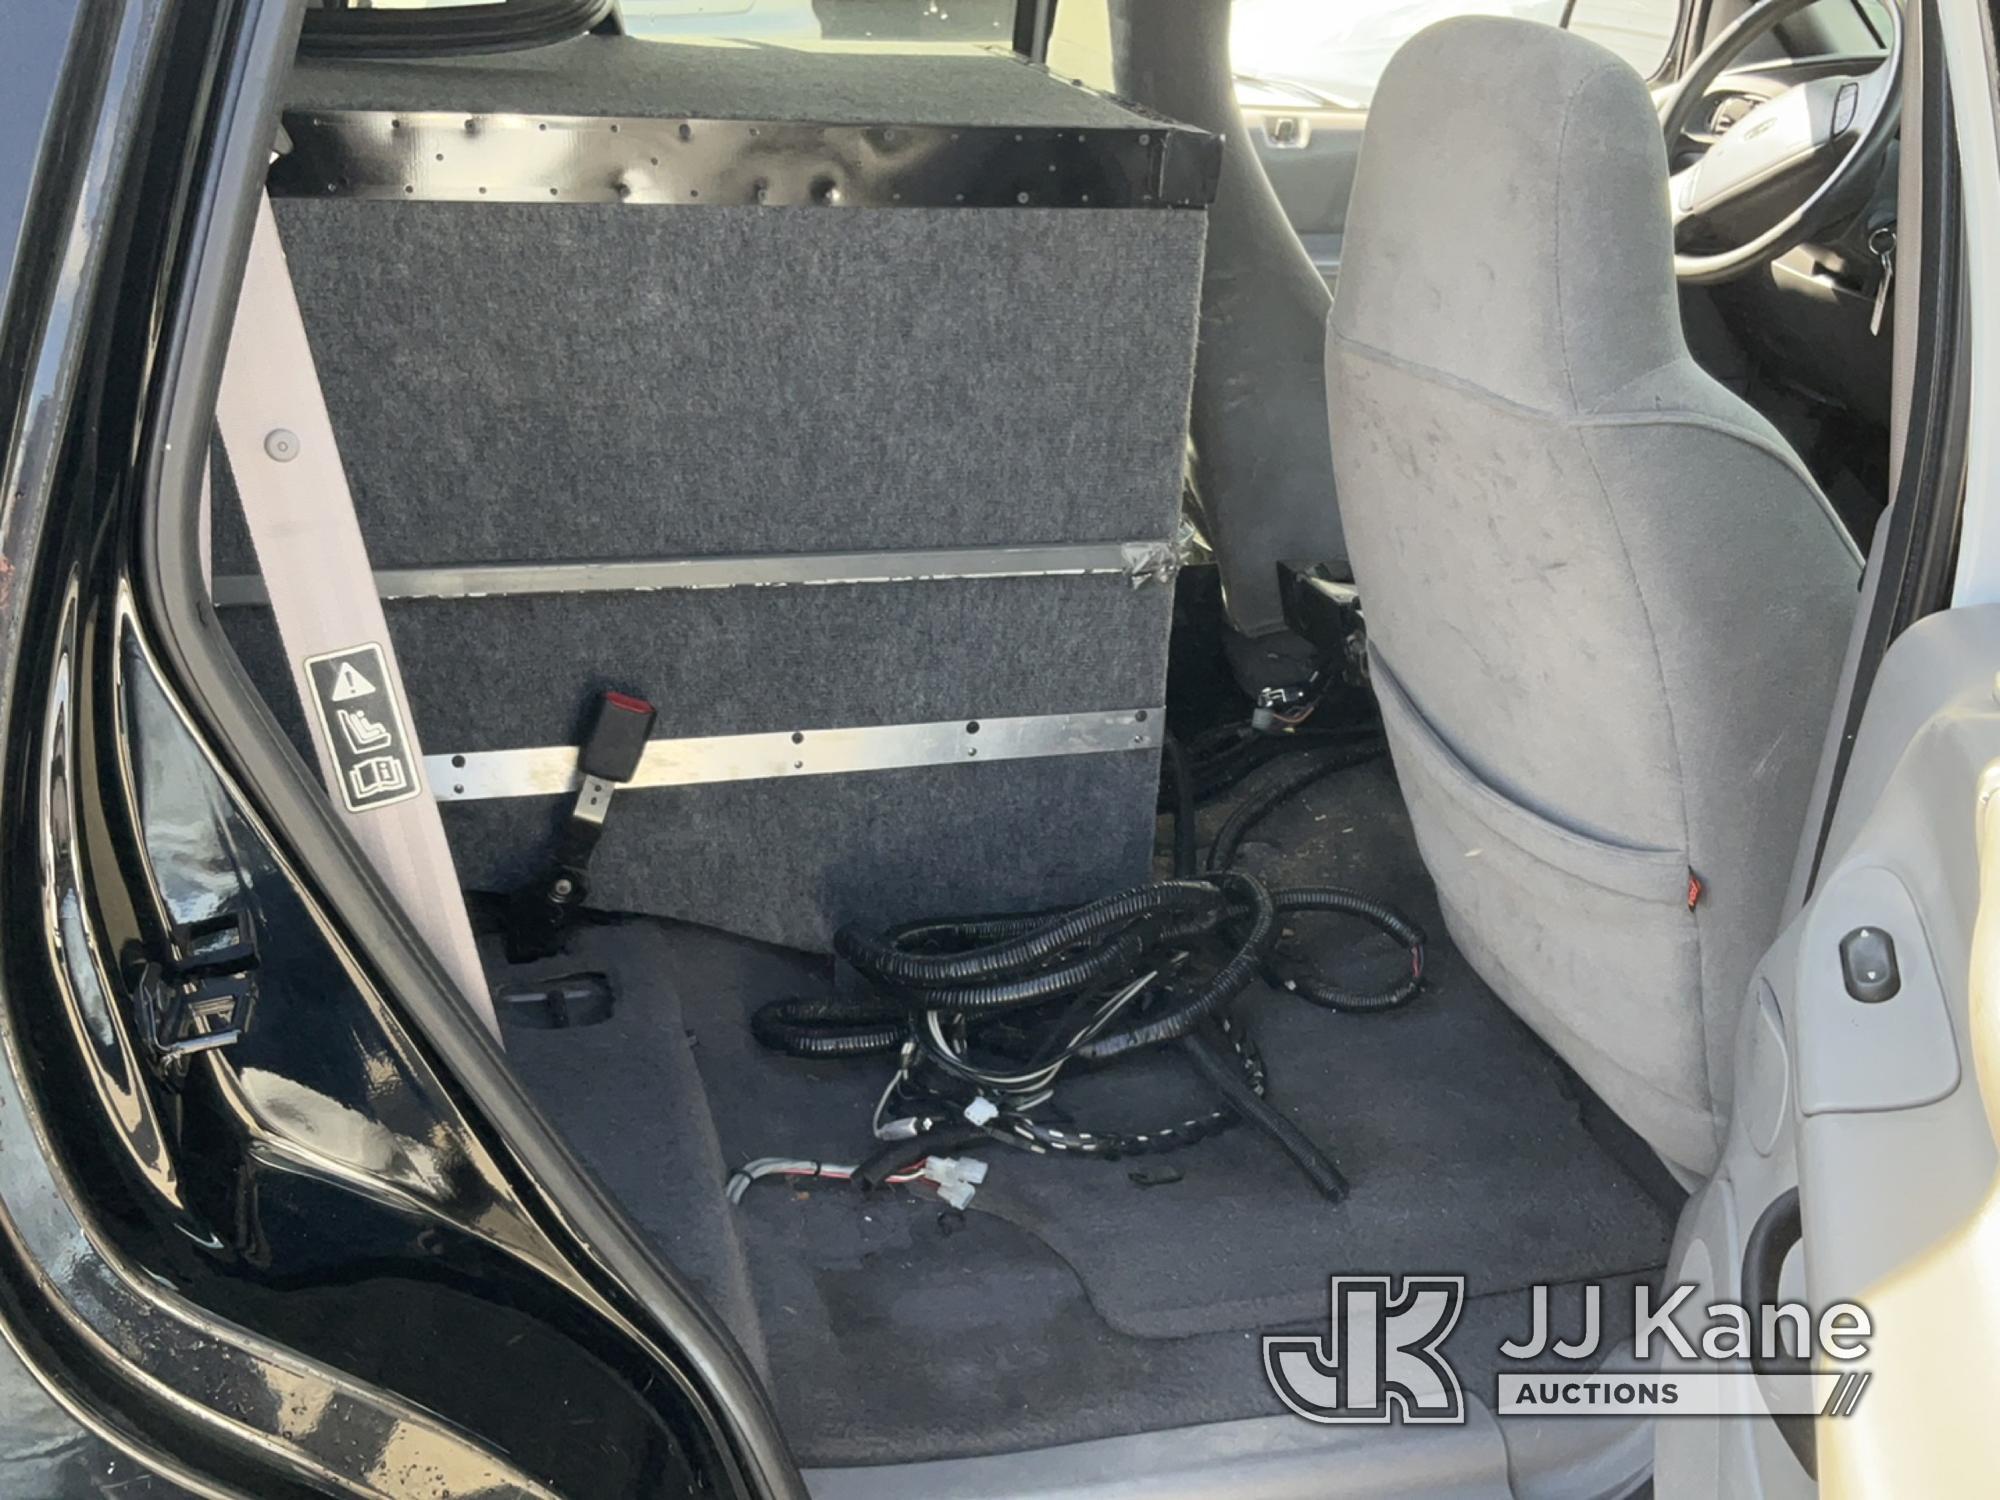 (Jurupa Valley, CA) 2002 Ford Expedition XLT Sport Utility Vehicle Runs & Moves, Paint Damage, Needs